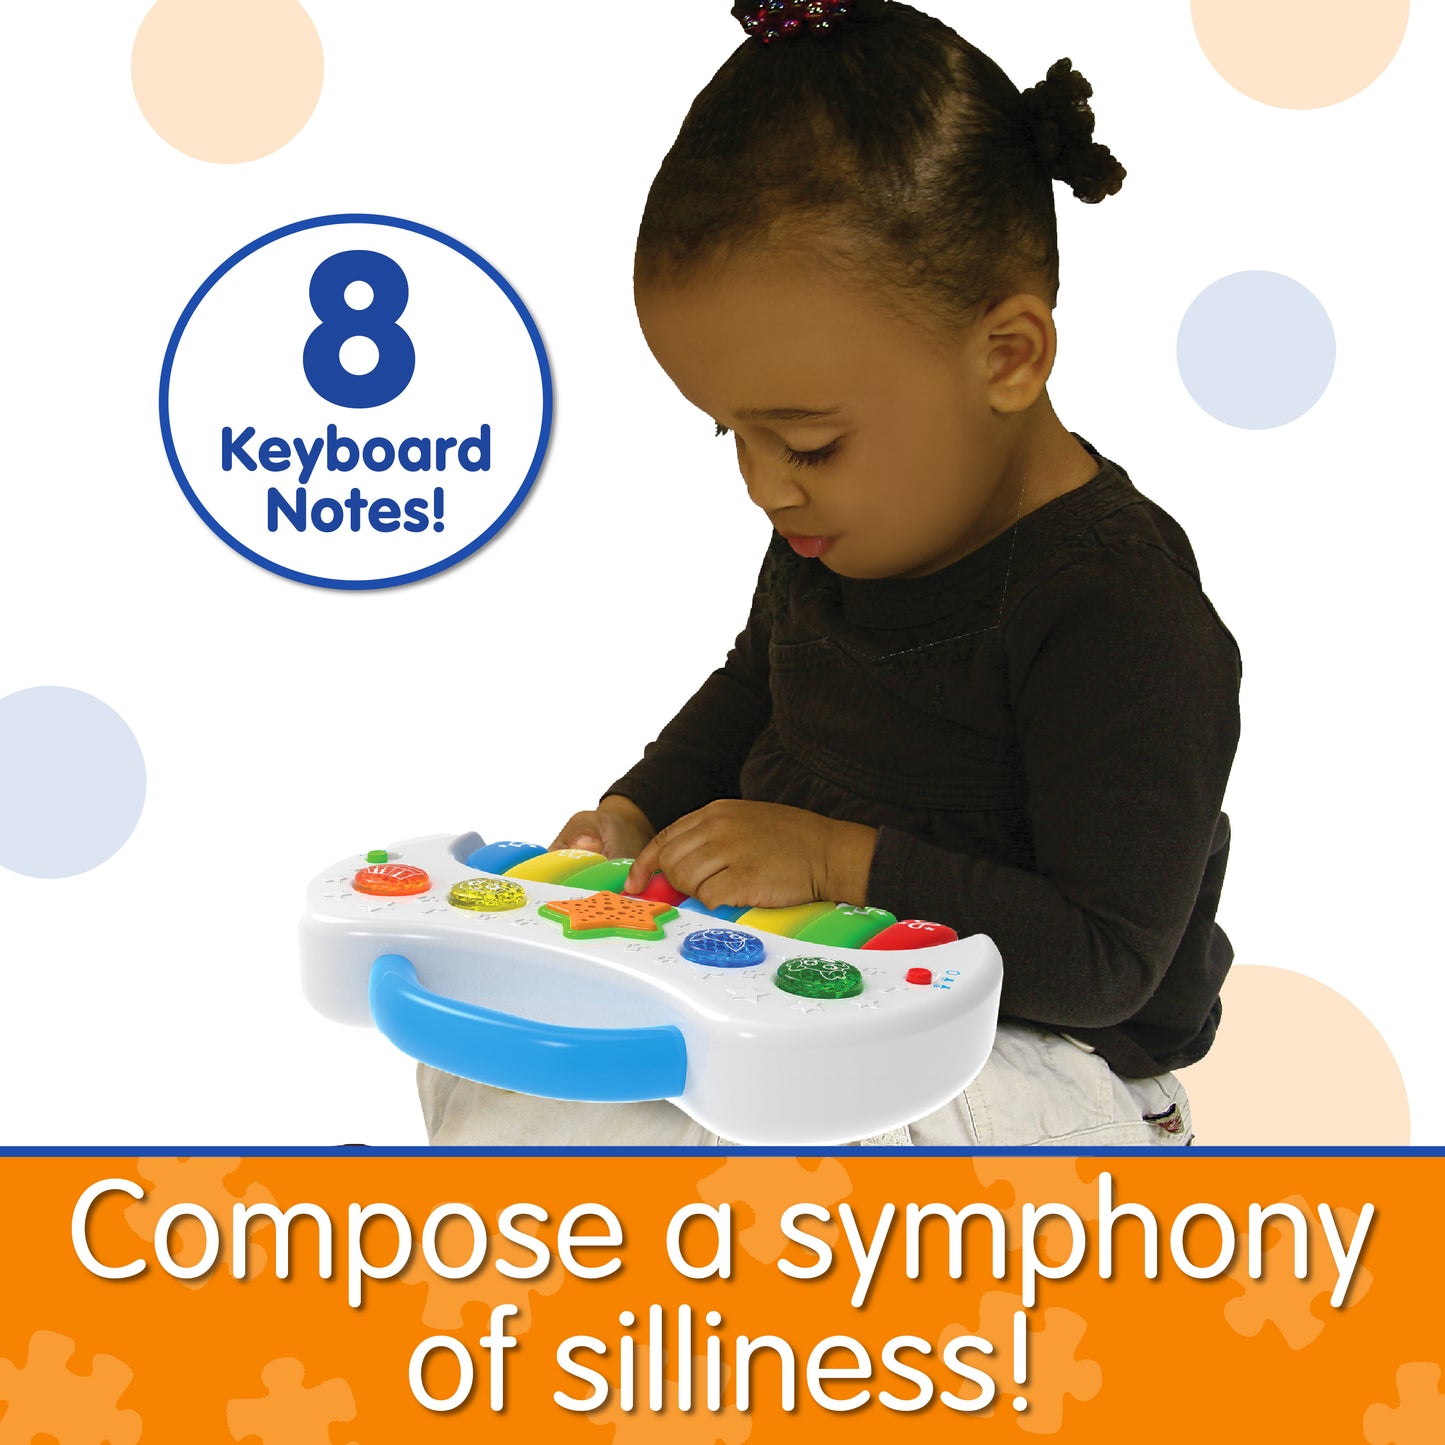 Infographic of little girl playing with Little Piano Tunes that says, "Compose a symphony of silliness!"